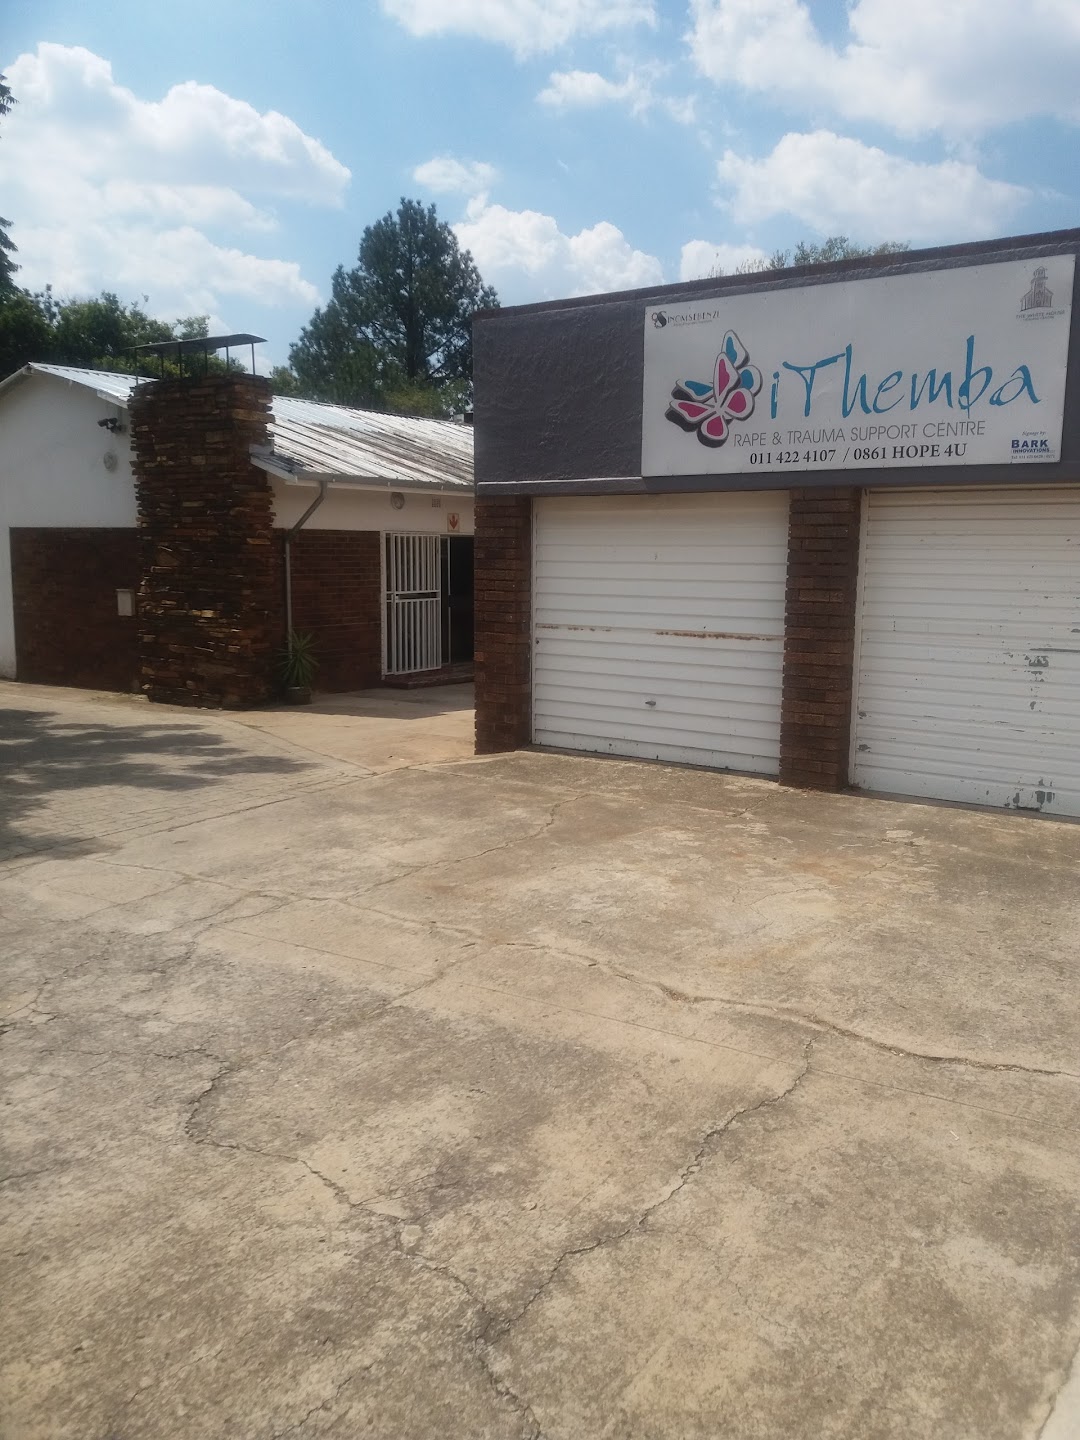 iThemba Rape And Trauma Support Centre